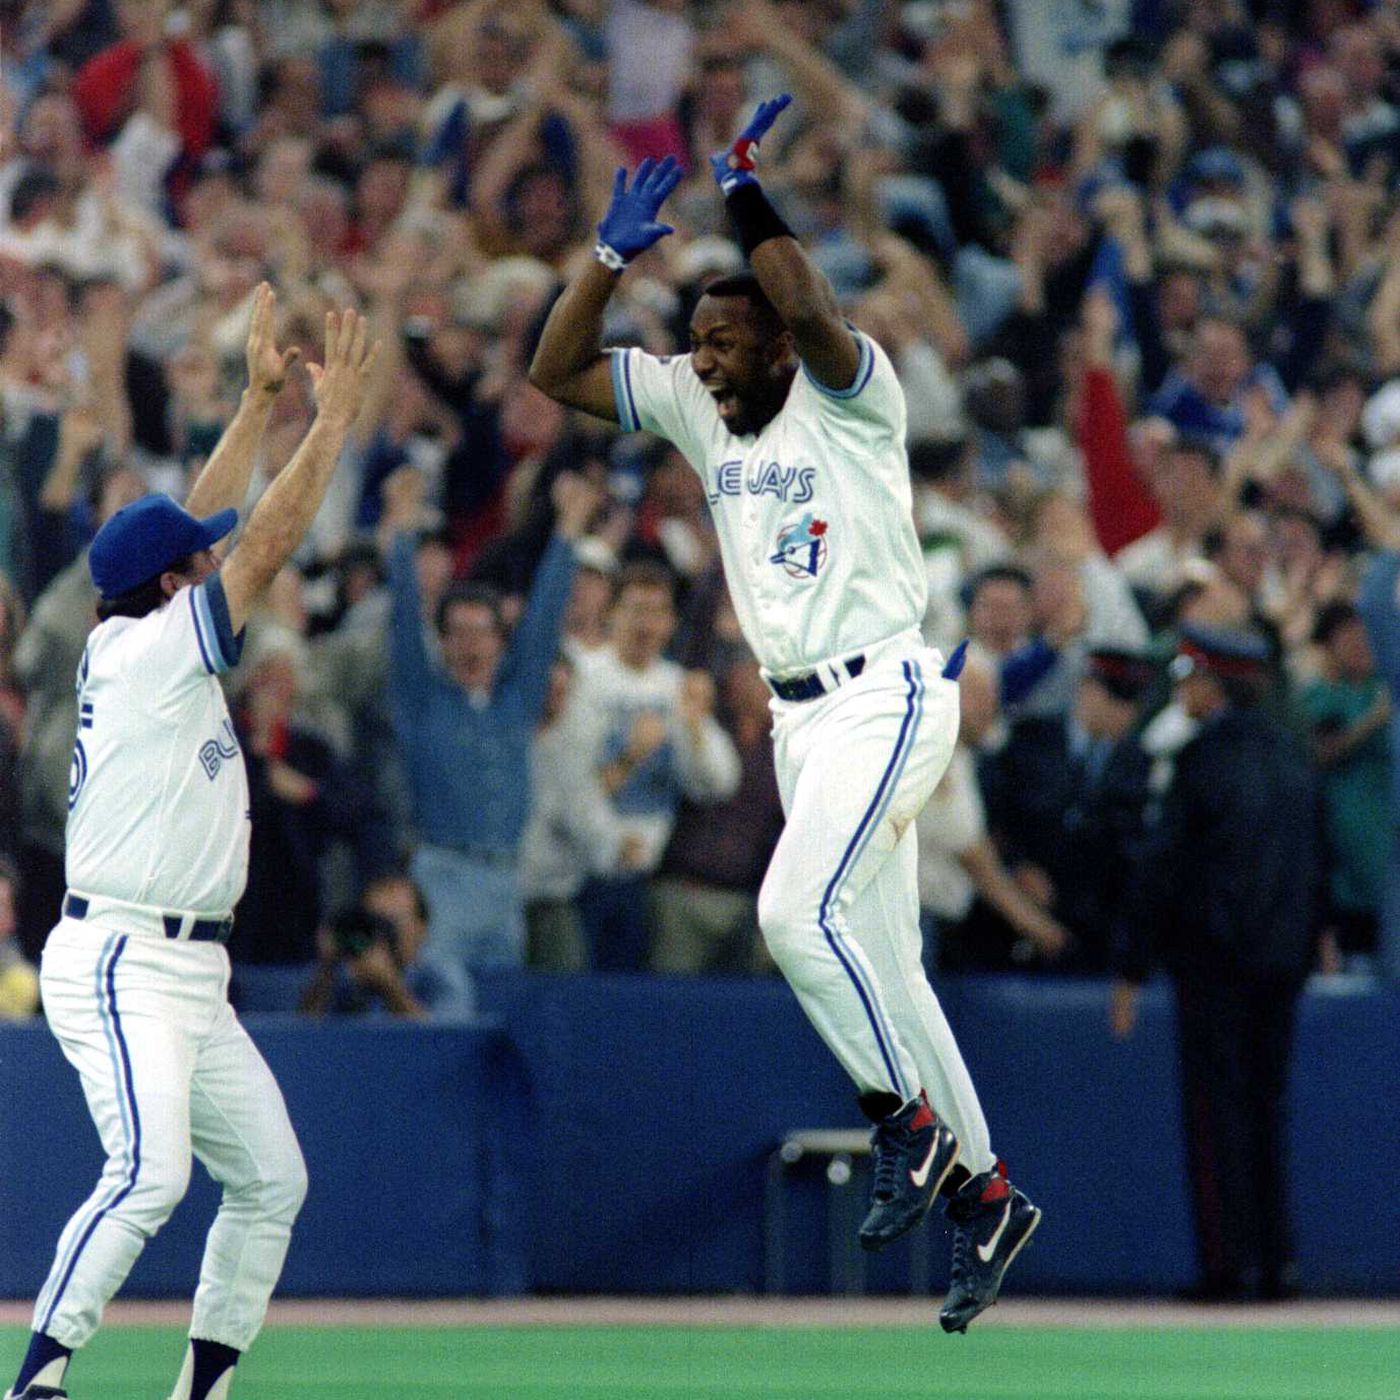 It's time to look Joe Carter in the eye - The Good Phight